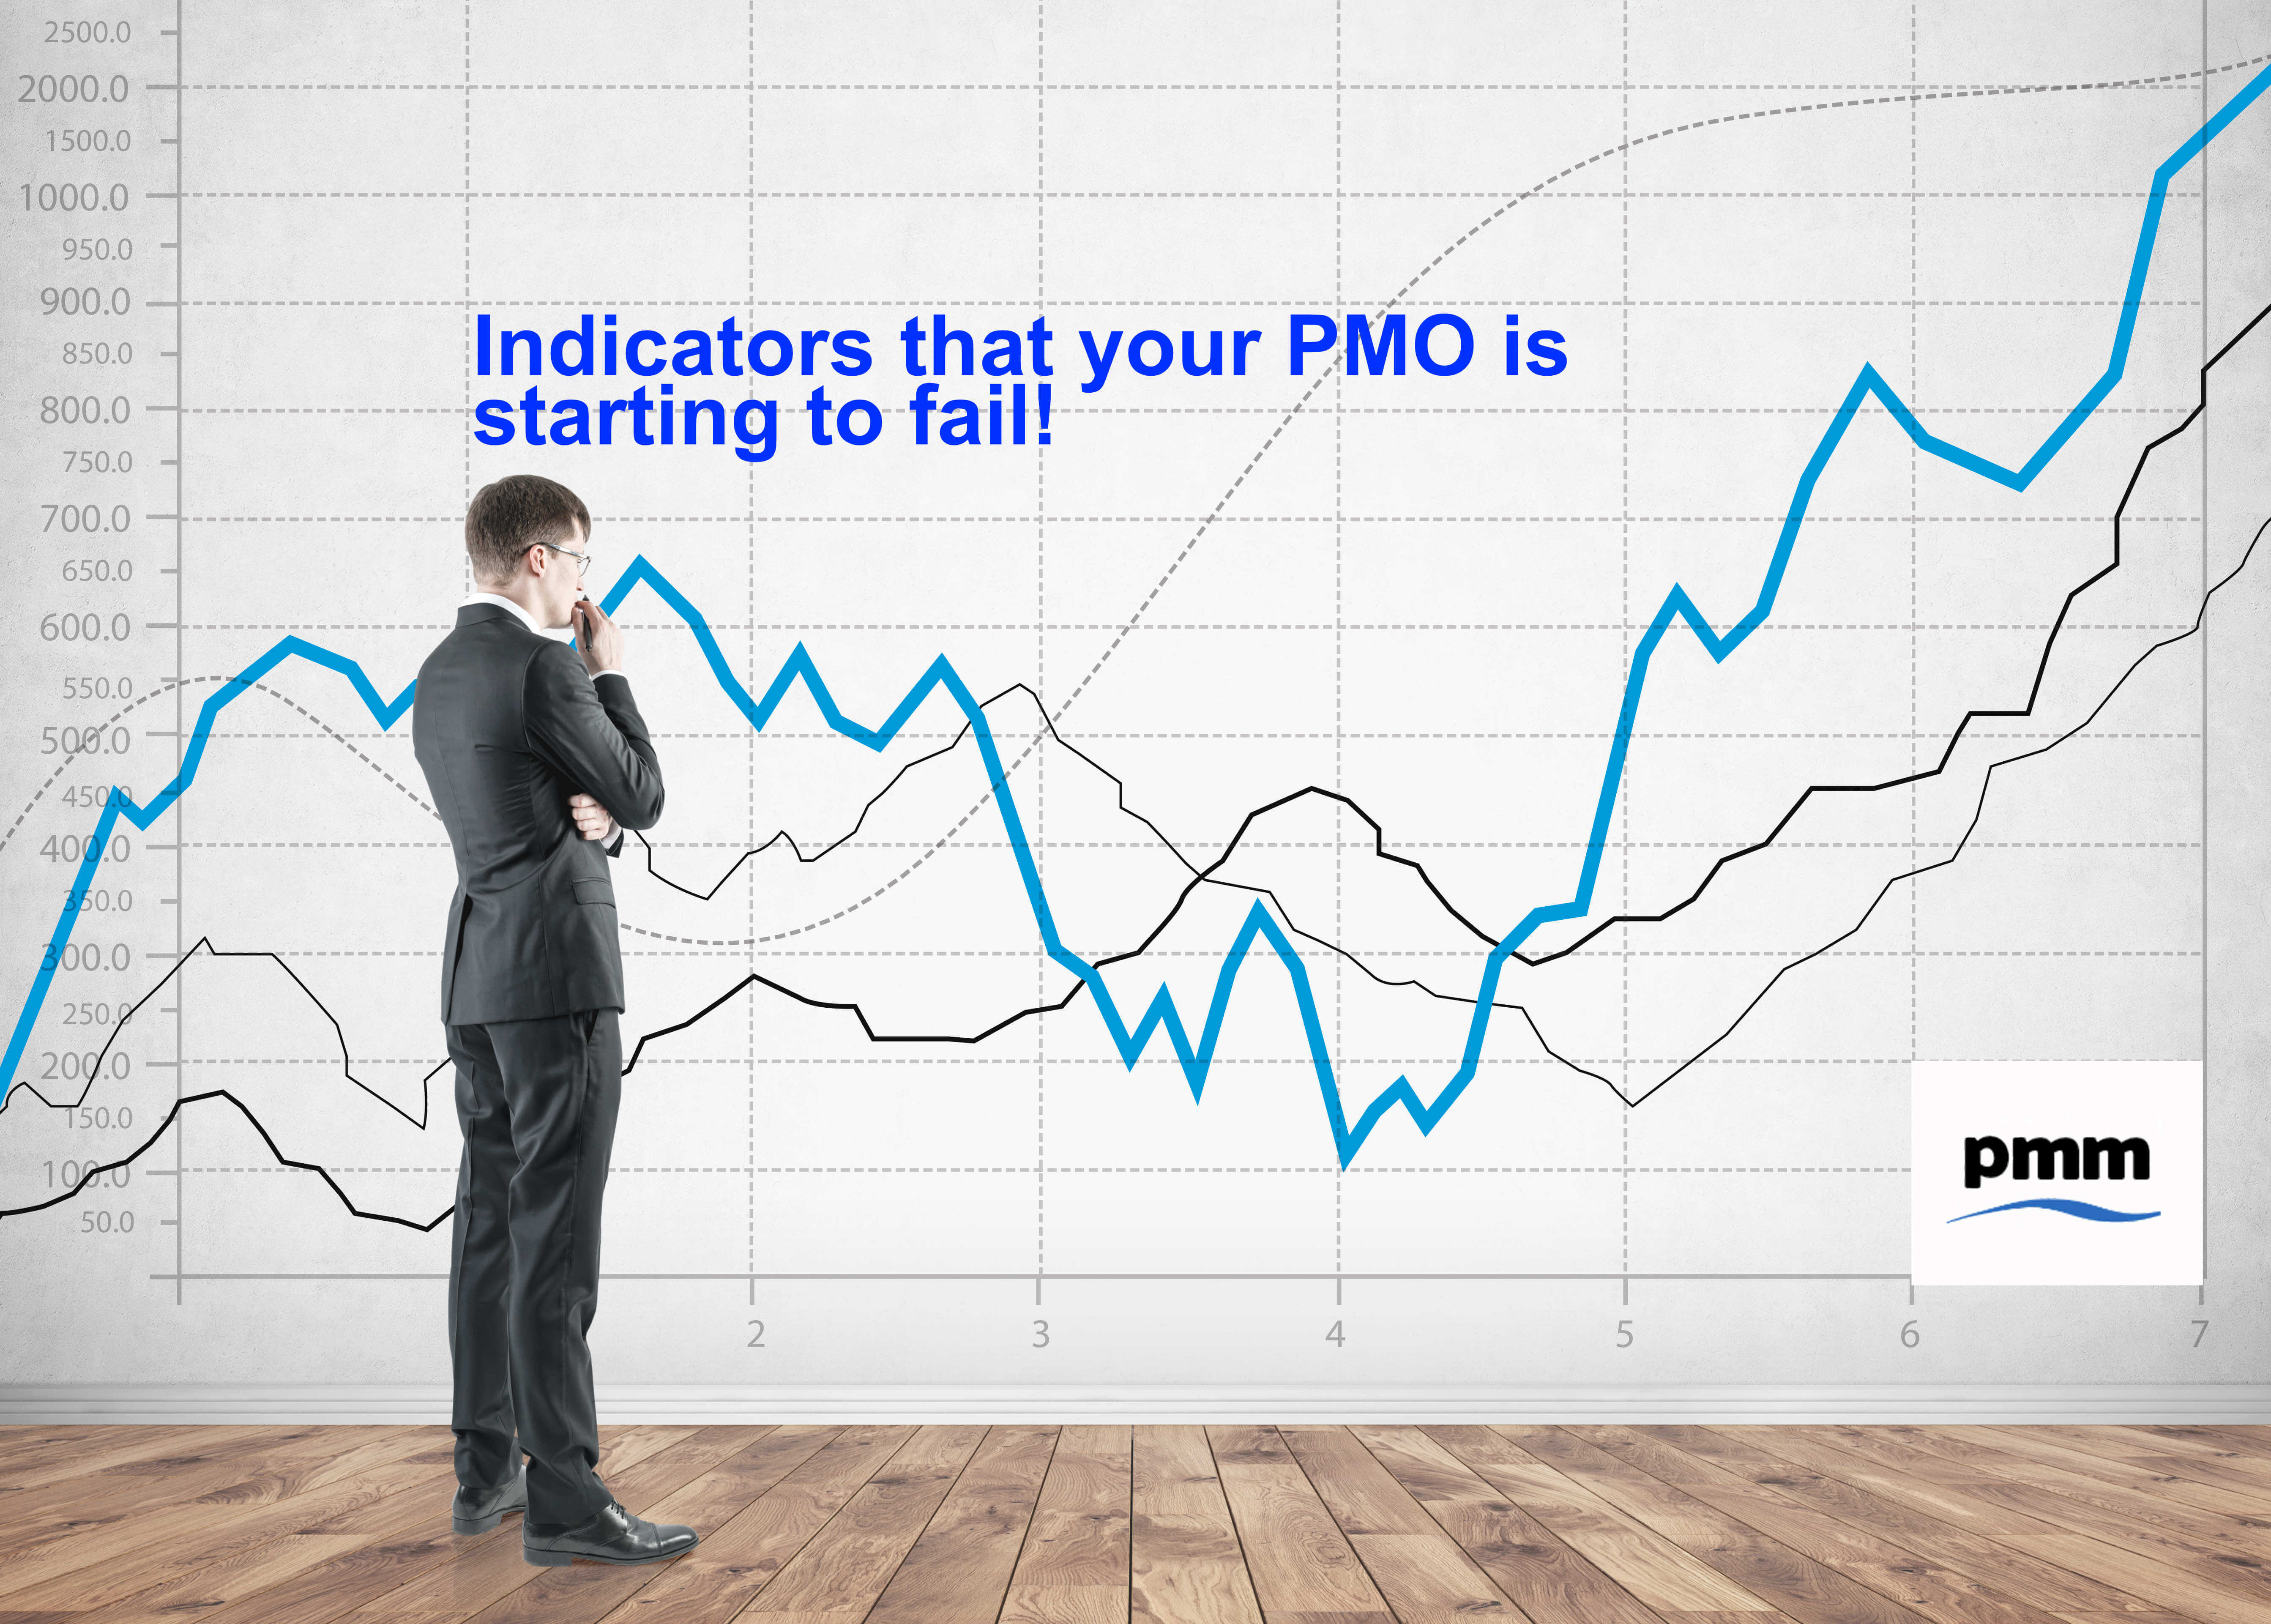 Indicators that your PMO is starting to fail